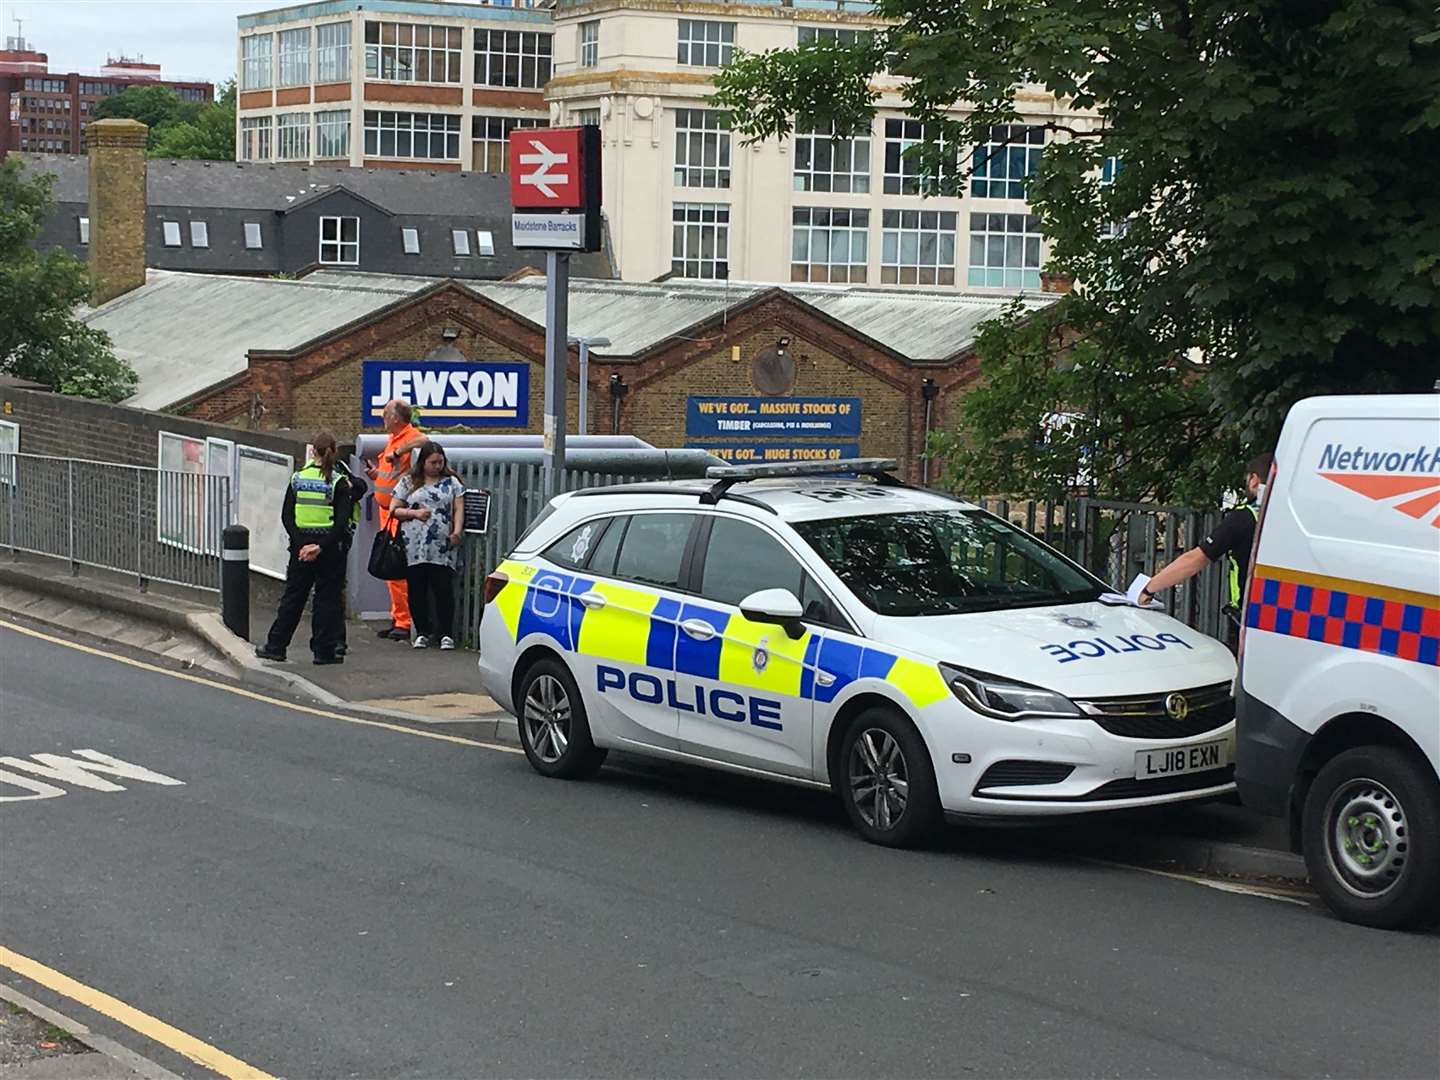 Police and a Network Rail response vehicle are at the station (11524047)